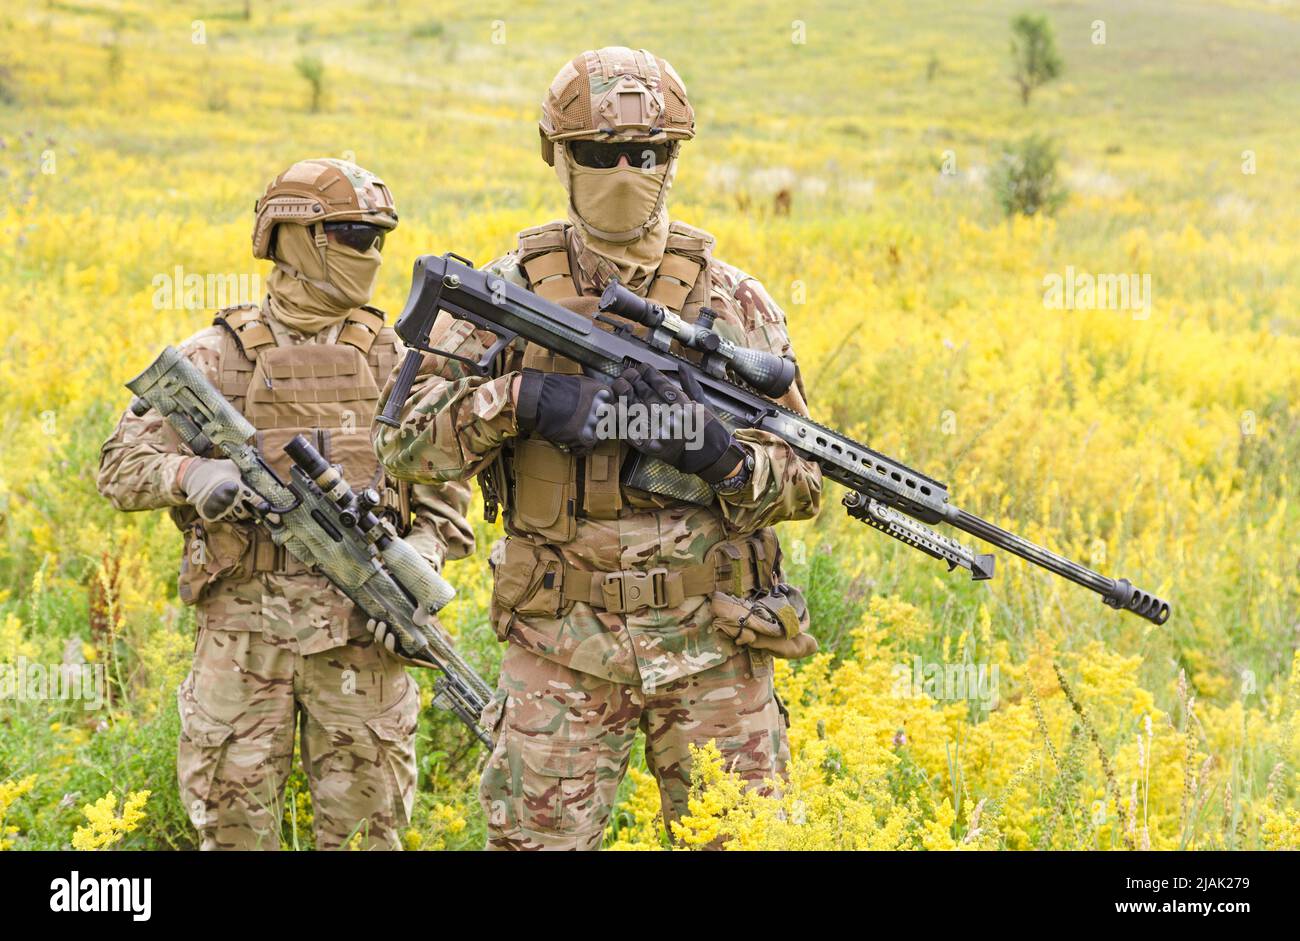 Two armed special forces soldiers with sniper rifles standing in a blooming field. Stock Photo